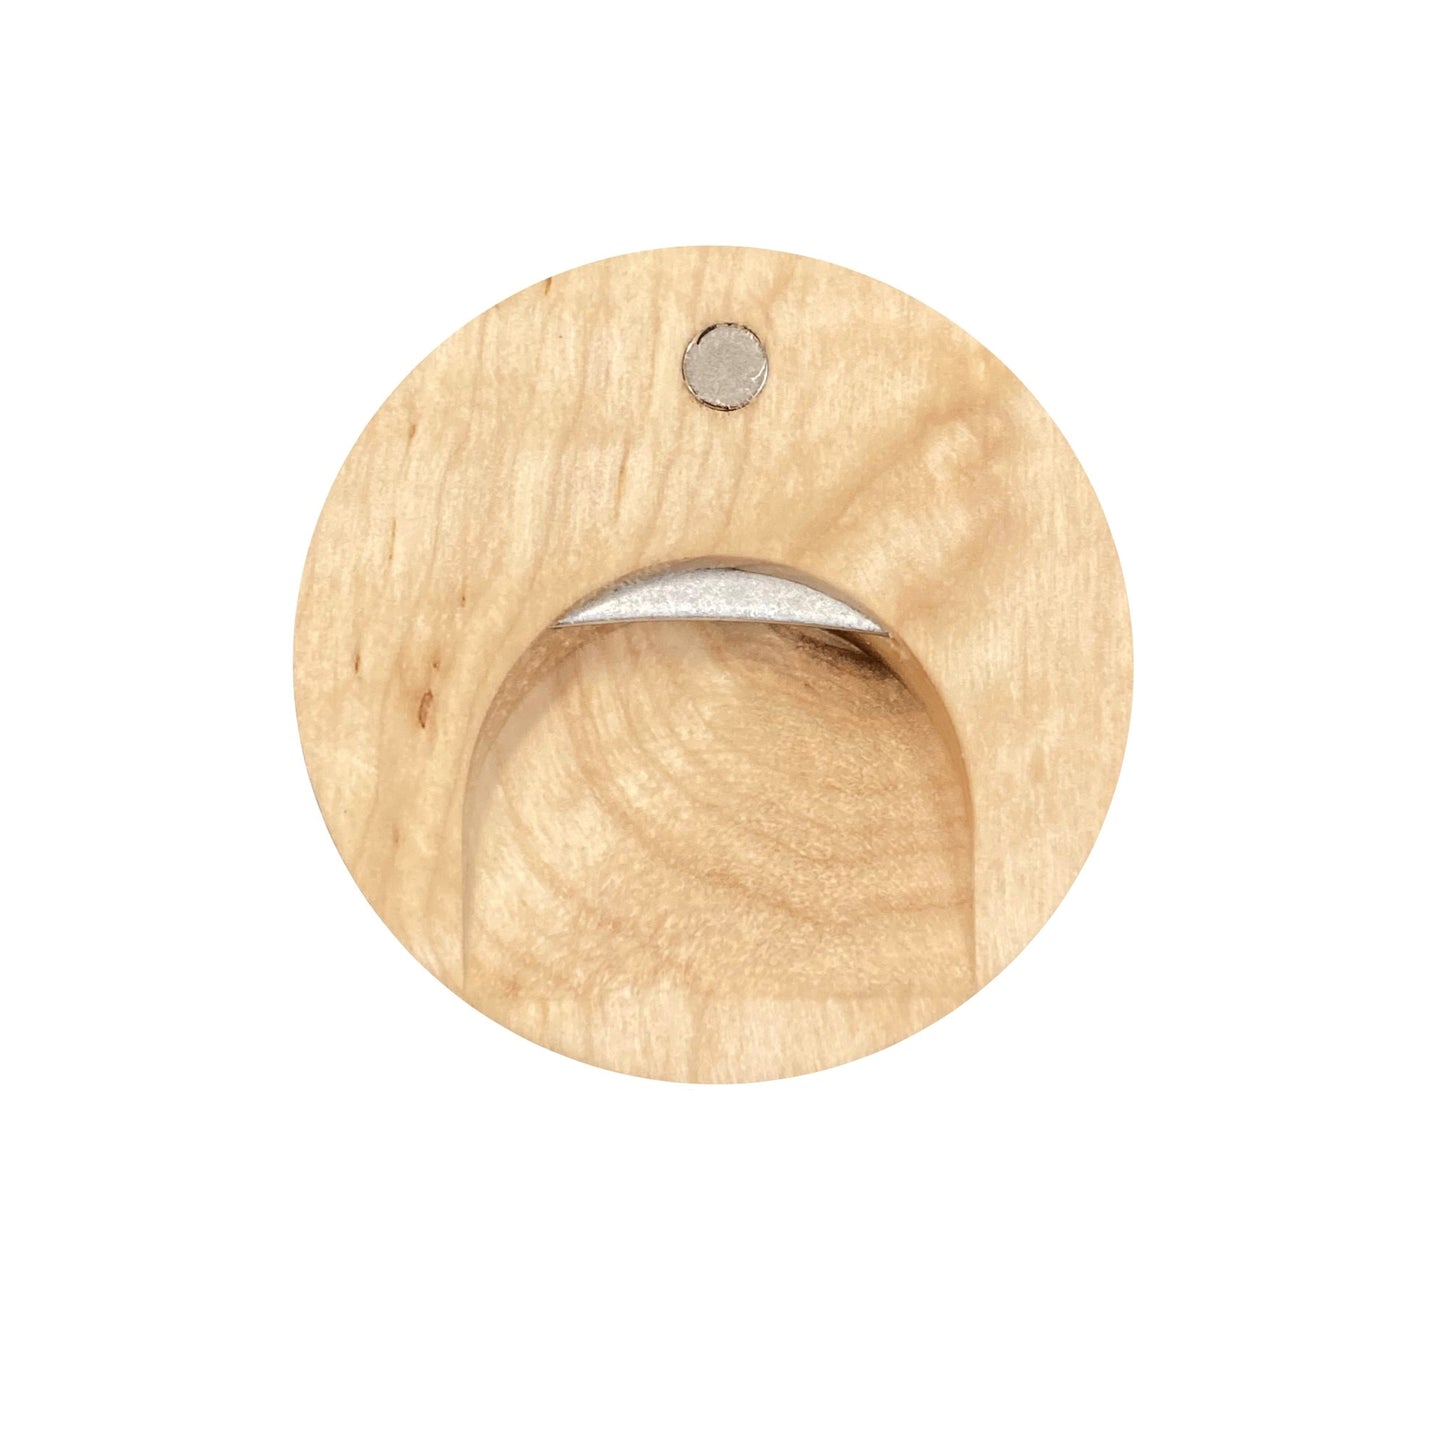 Wood Magnet with Bottle Opener